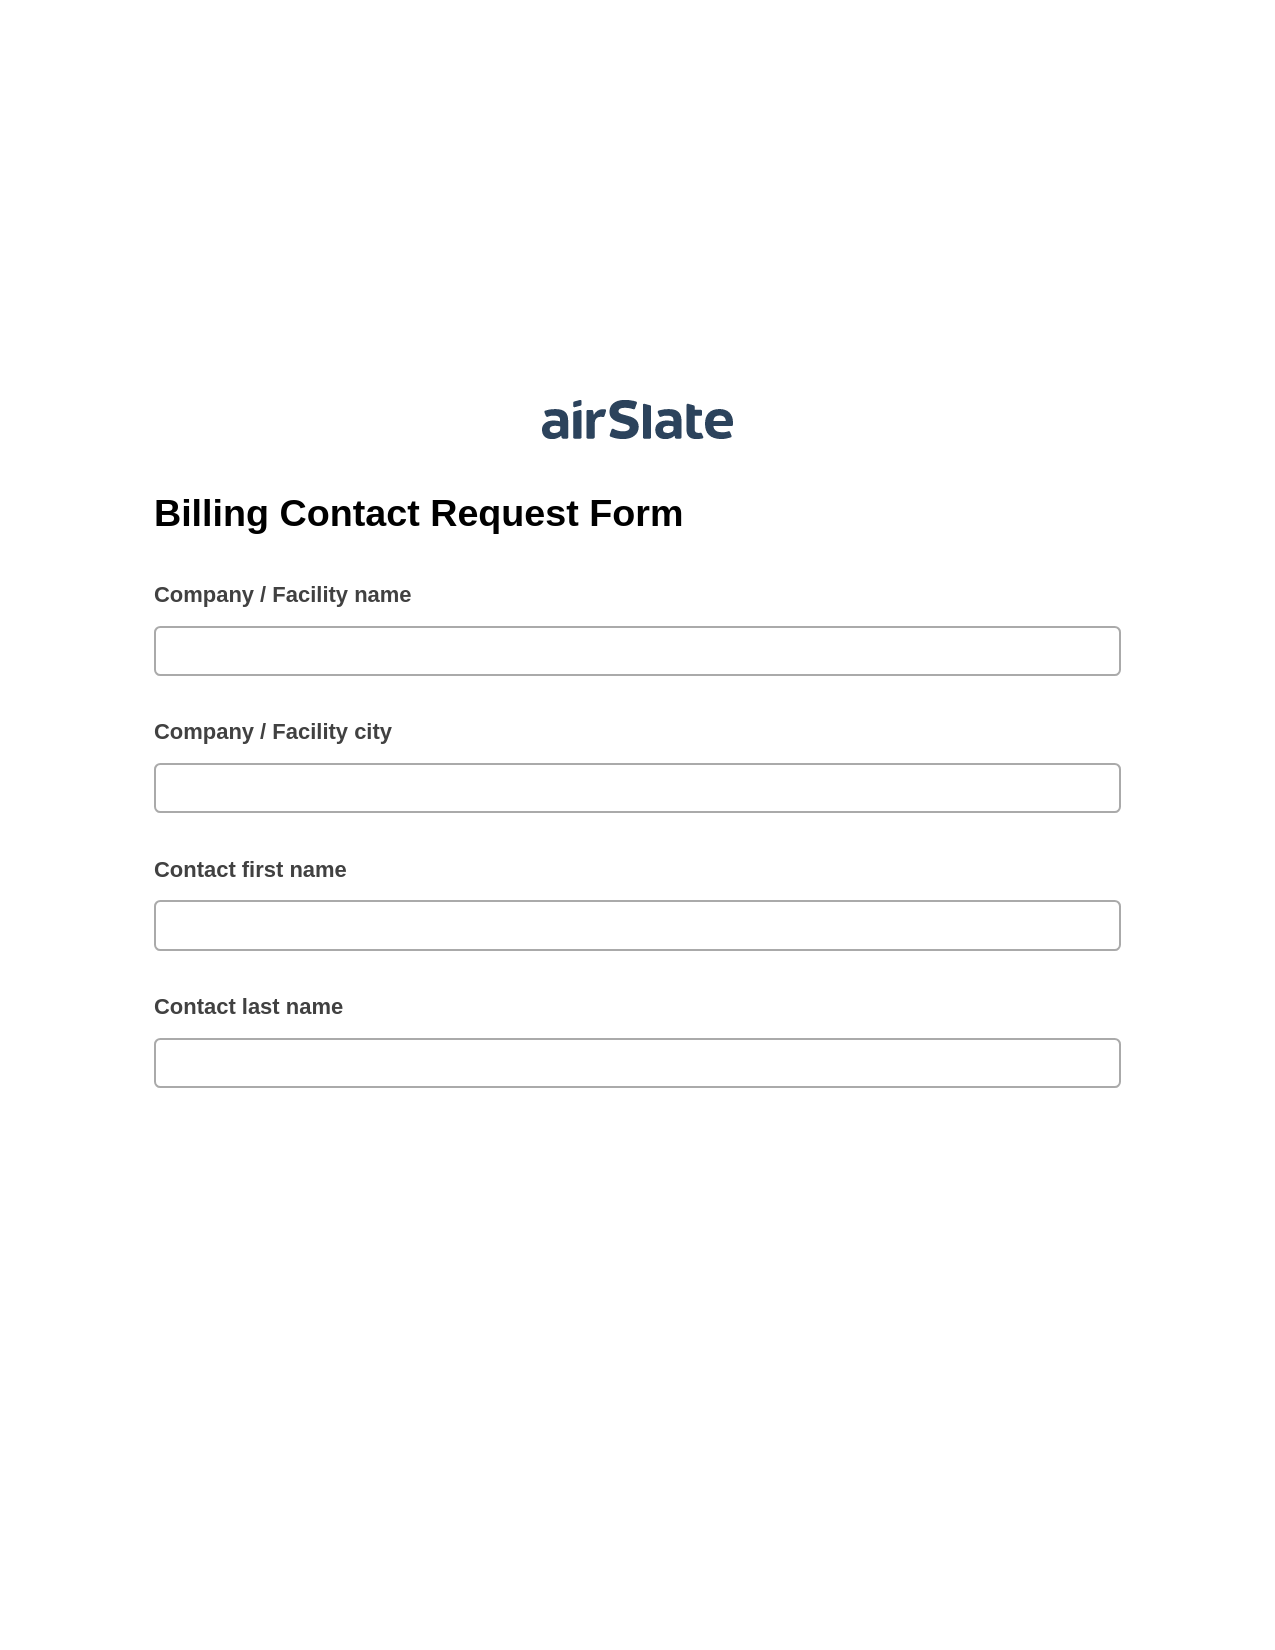 Multirole Billing Contact Request Form Pre-fill Slate from MS Dynamics 365 Records Bot, Reminder Bot, Google Drive Bot